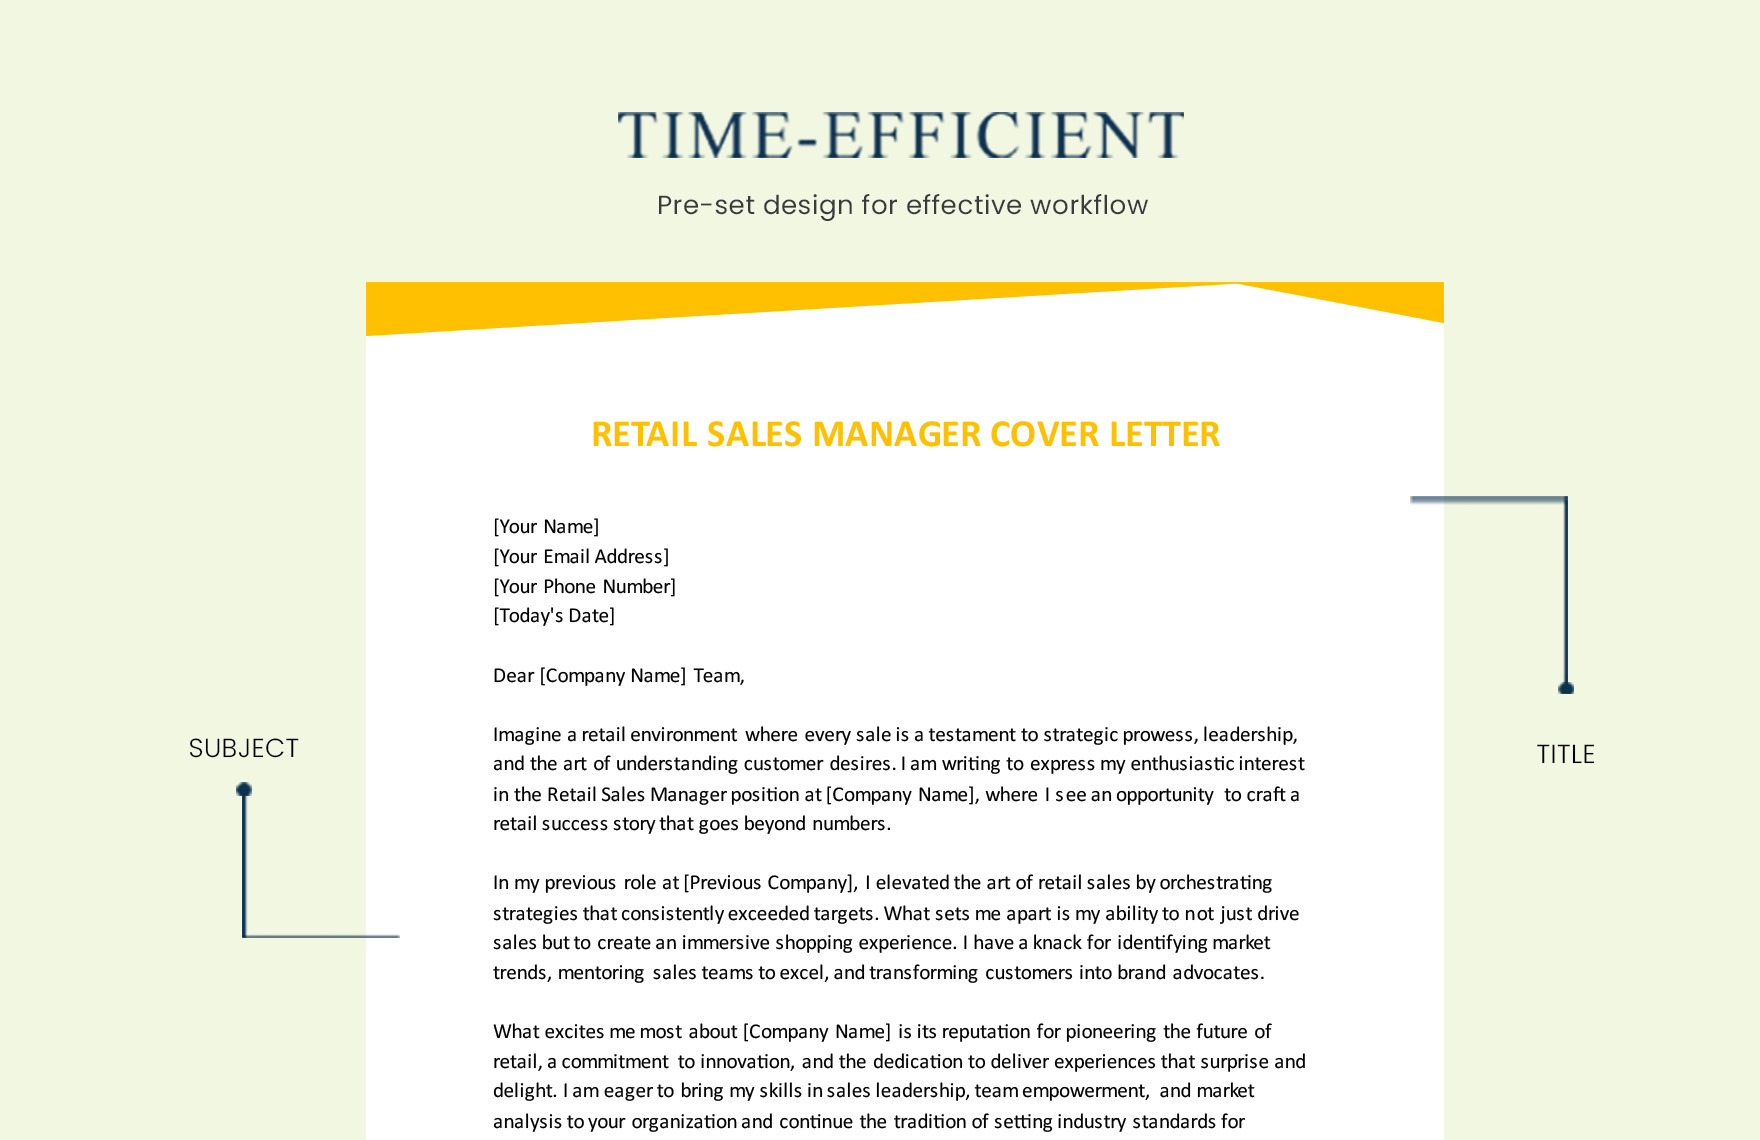 Retail Sales Manager Cover Letter